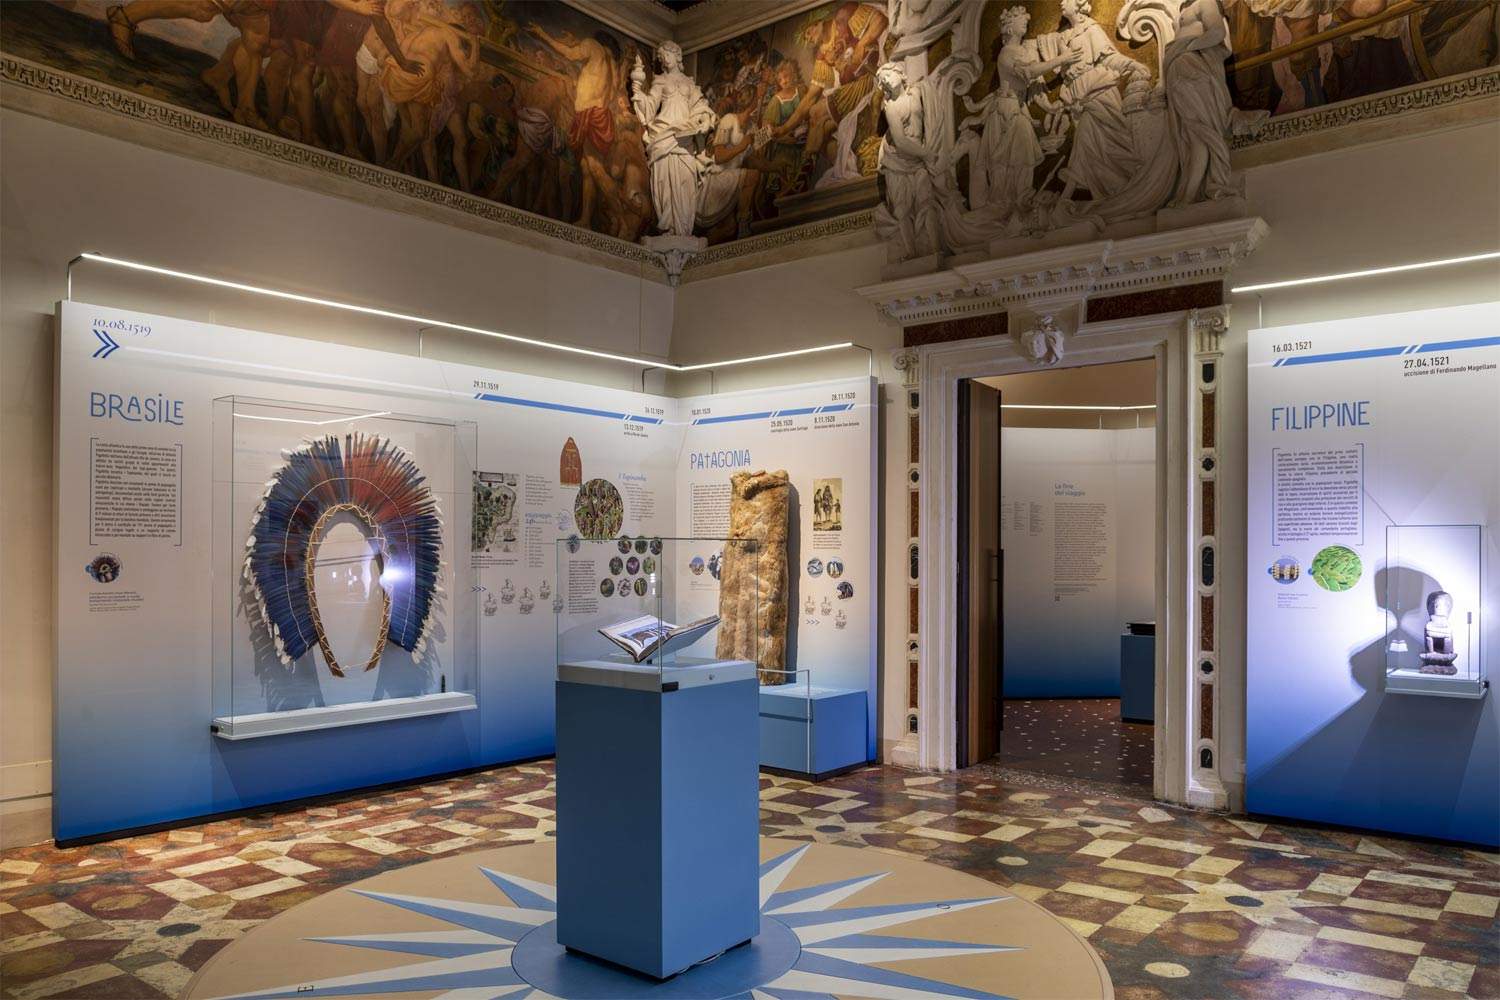 Exhibition in Vicenza dedicated to Antonio Pigafetta and the first circumnavigation of the world